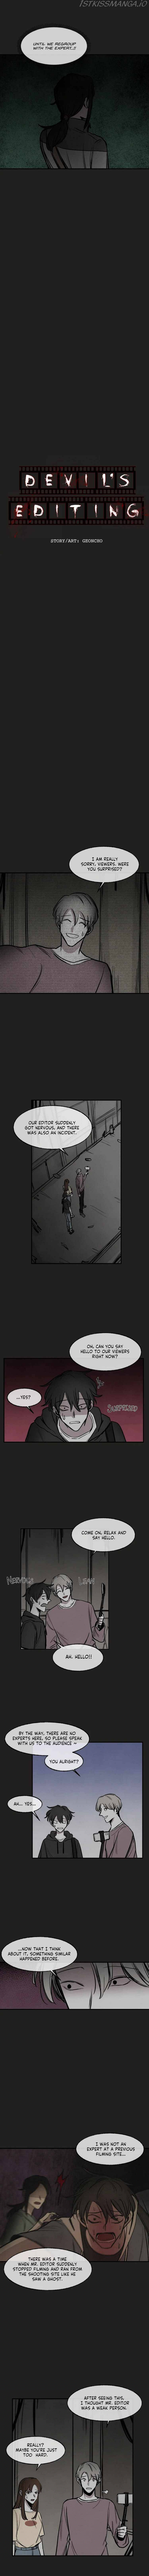 Devil’s Editing Chapter 28 - Page 2